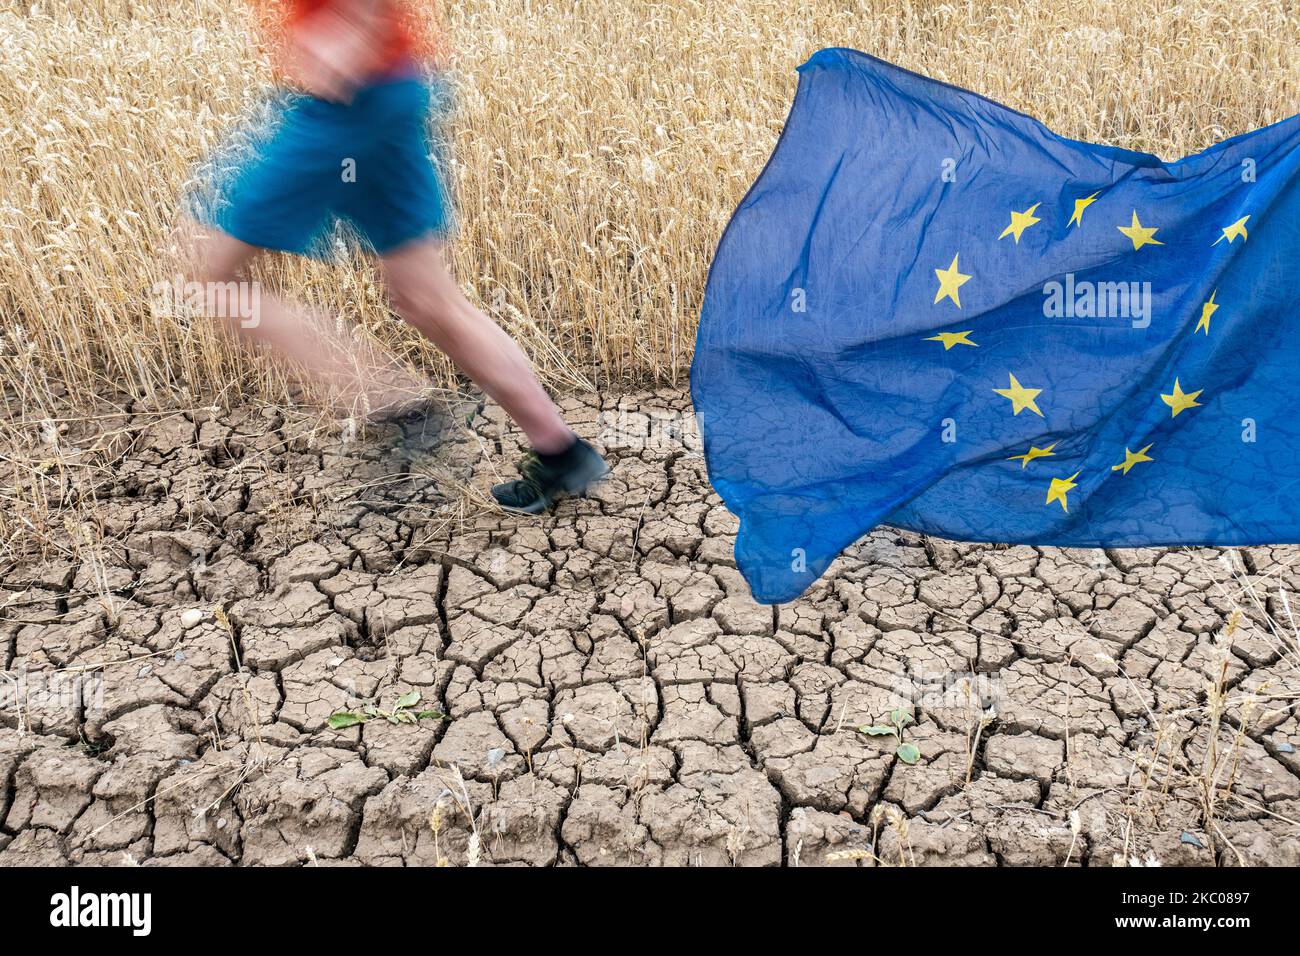 Man running on cracked earth next to wheat field with EU flag. Global warming, climate change, crisis, drought... concept, Europe Stock Photo